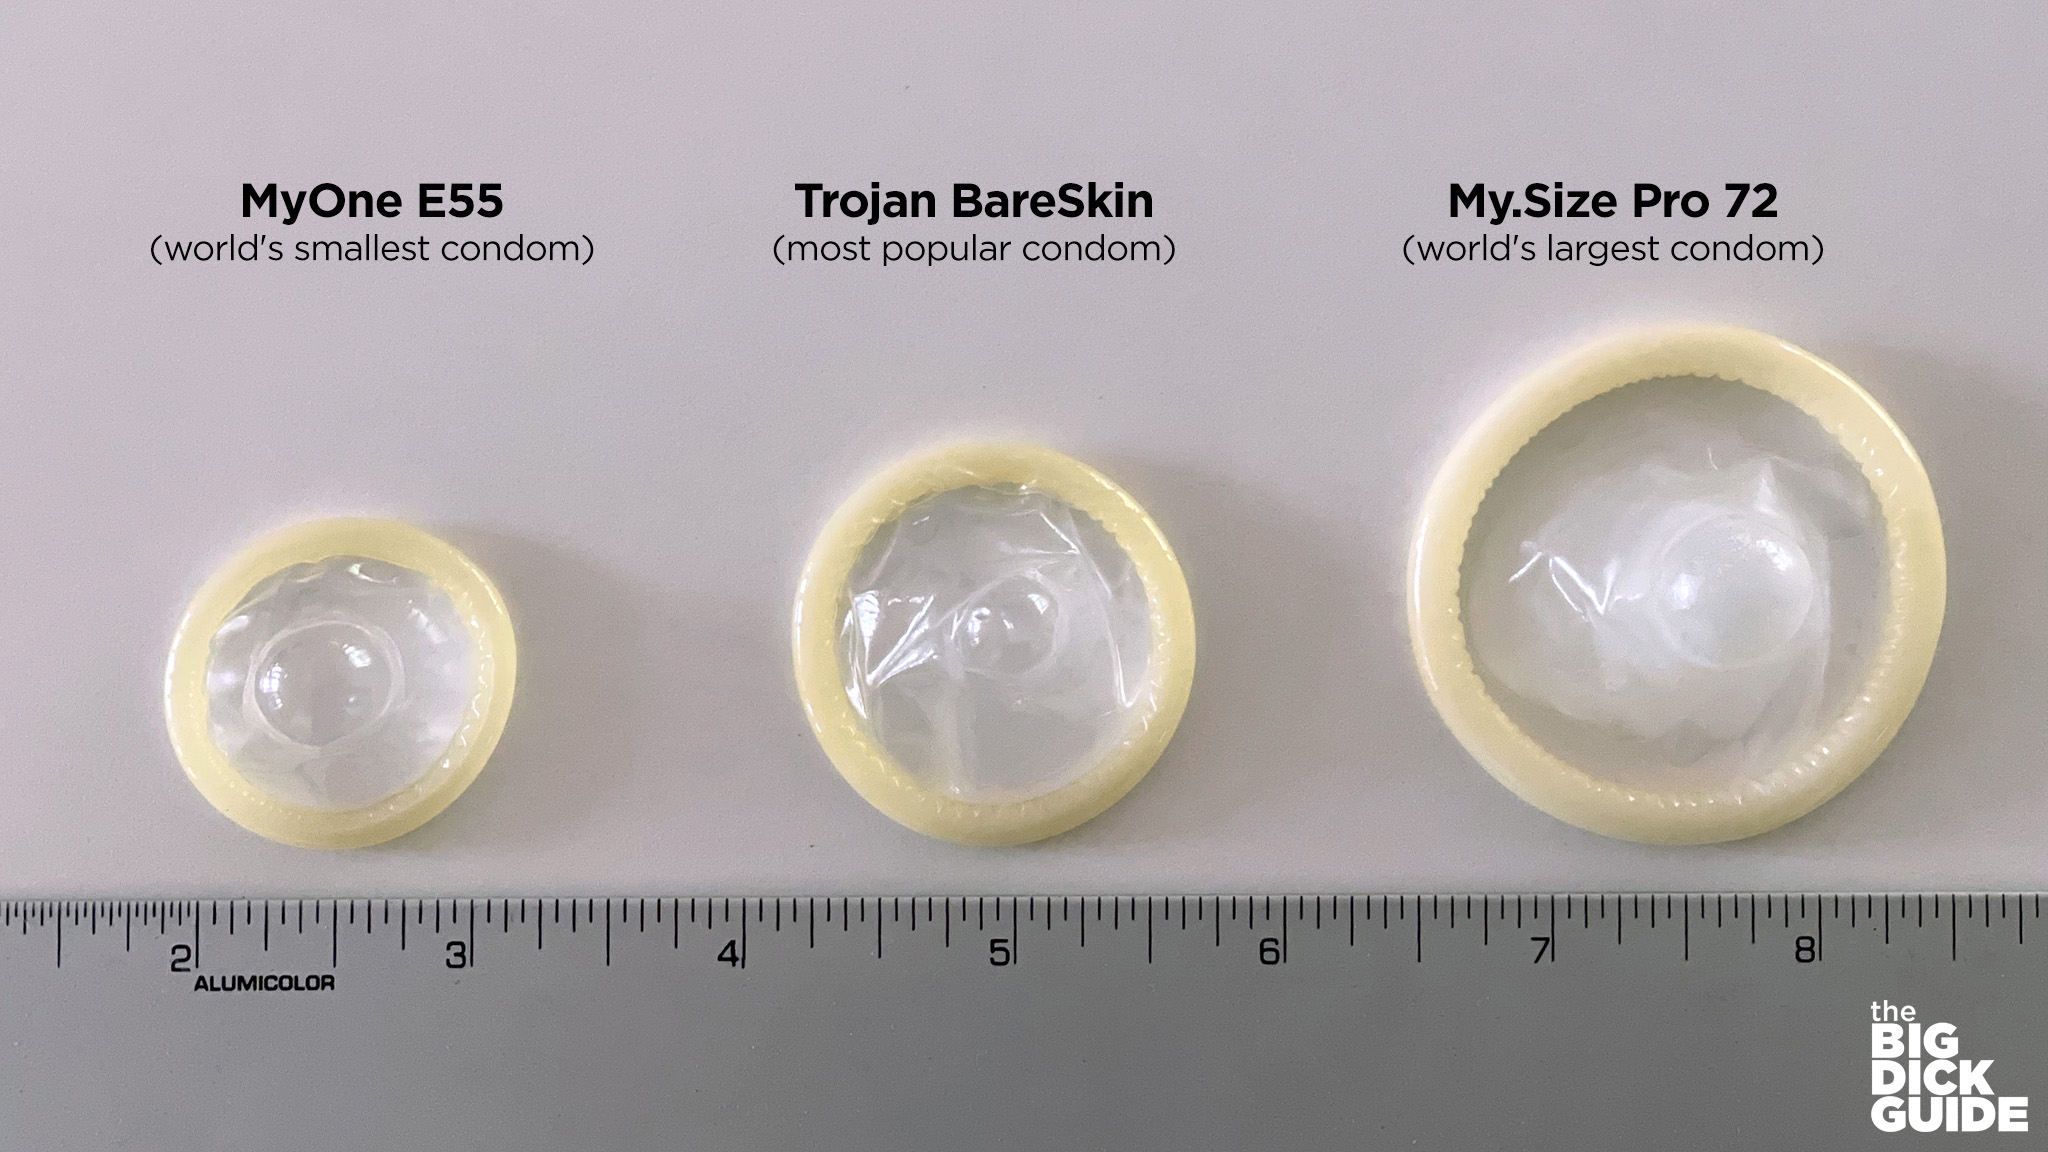 The world's largest condom vs. the world's smallest condom – The